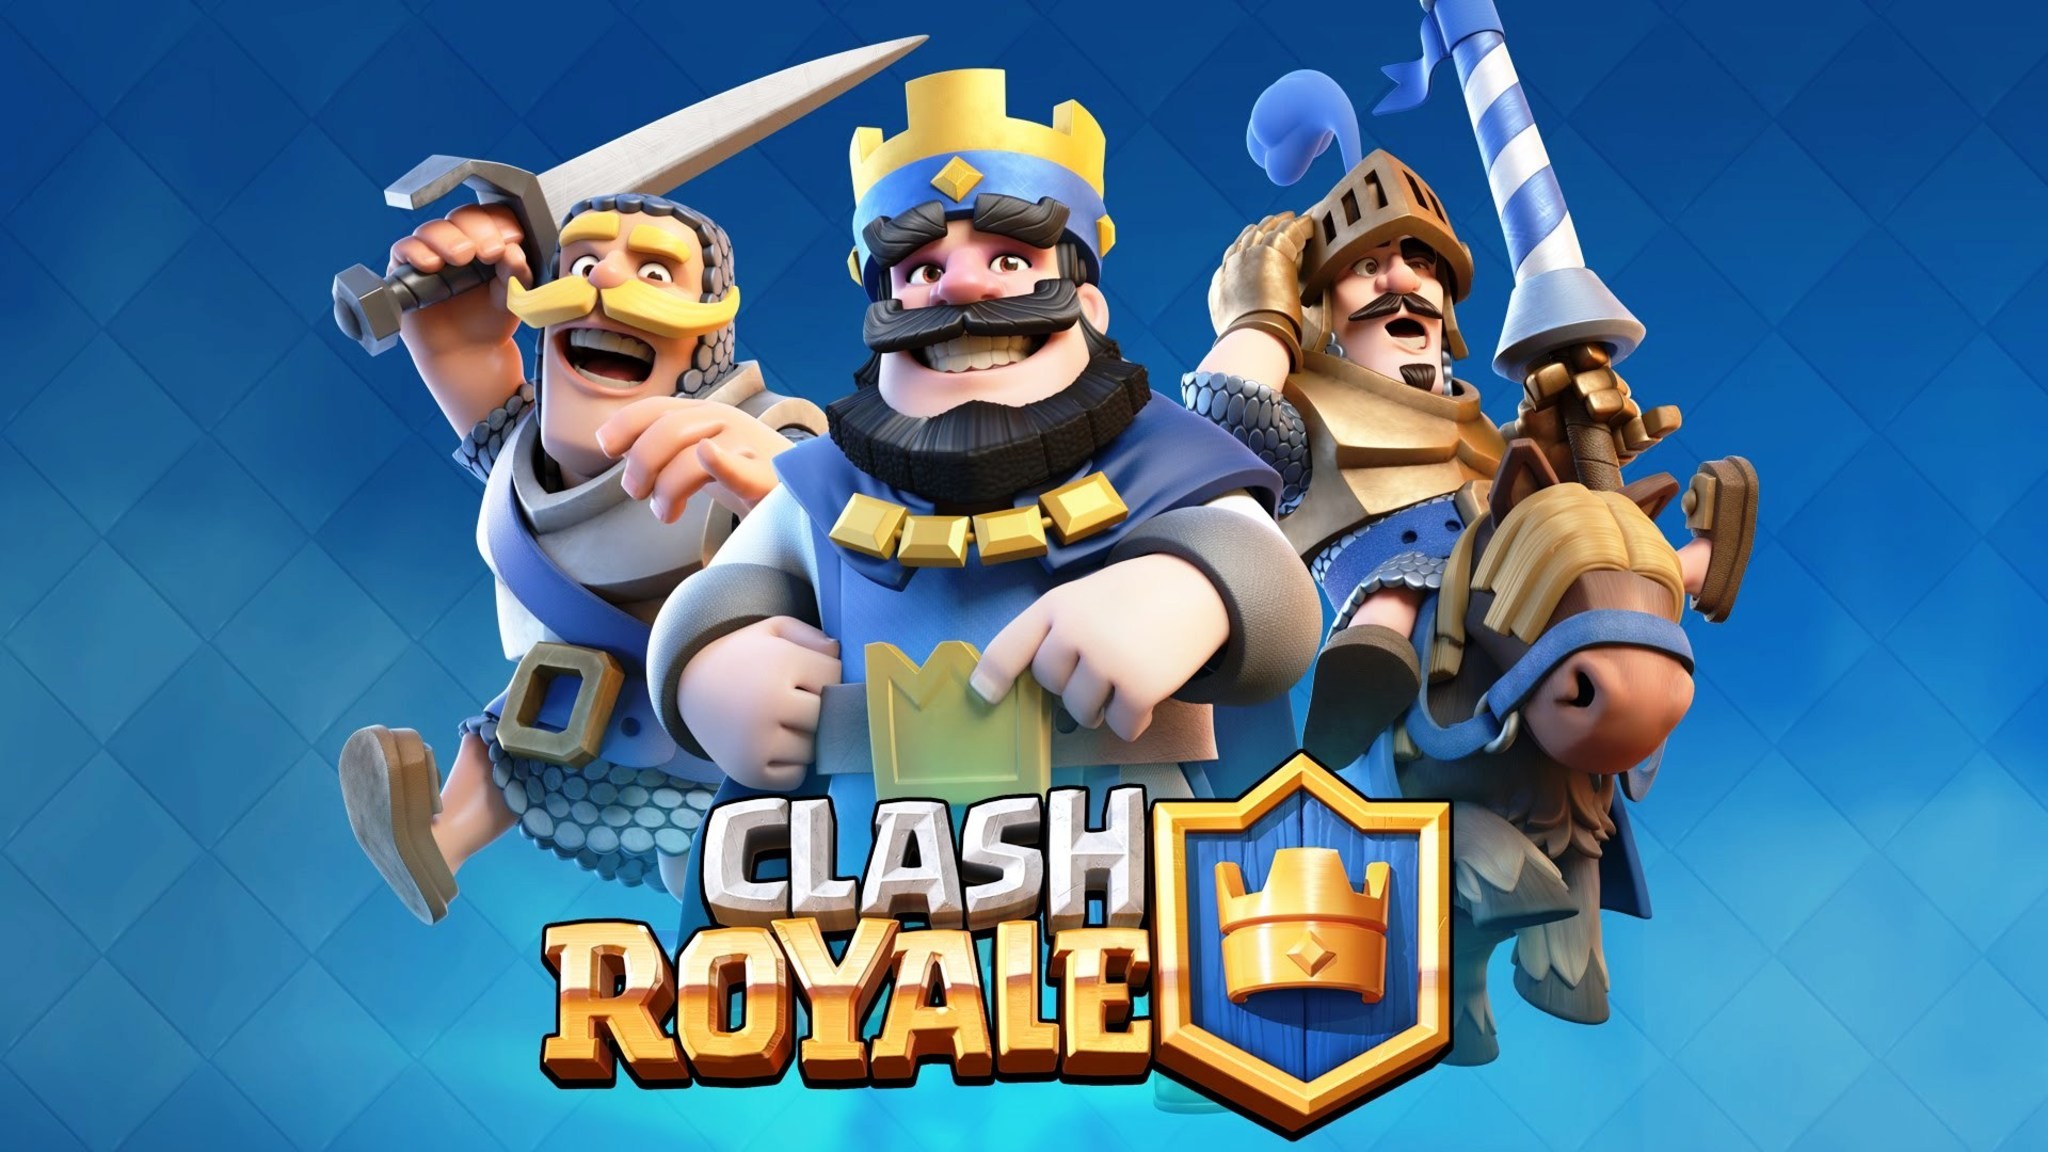 Pin by SINUS ☑️ on Supercell hd wallpaper  Clash royale, Clash royale  drawings, Clash royale wallpaper